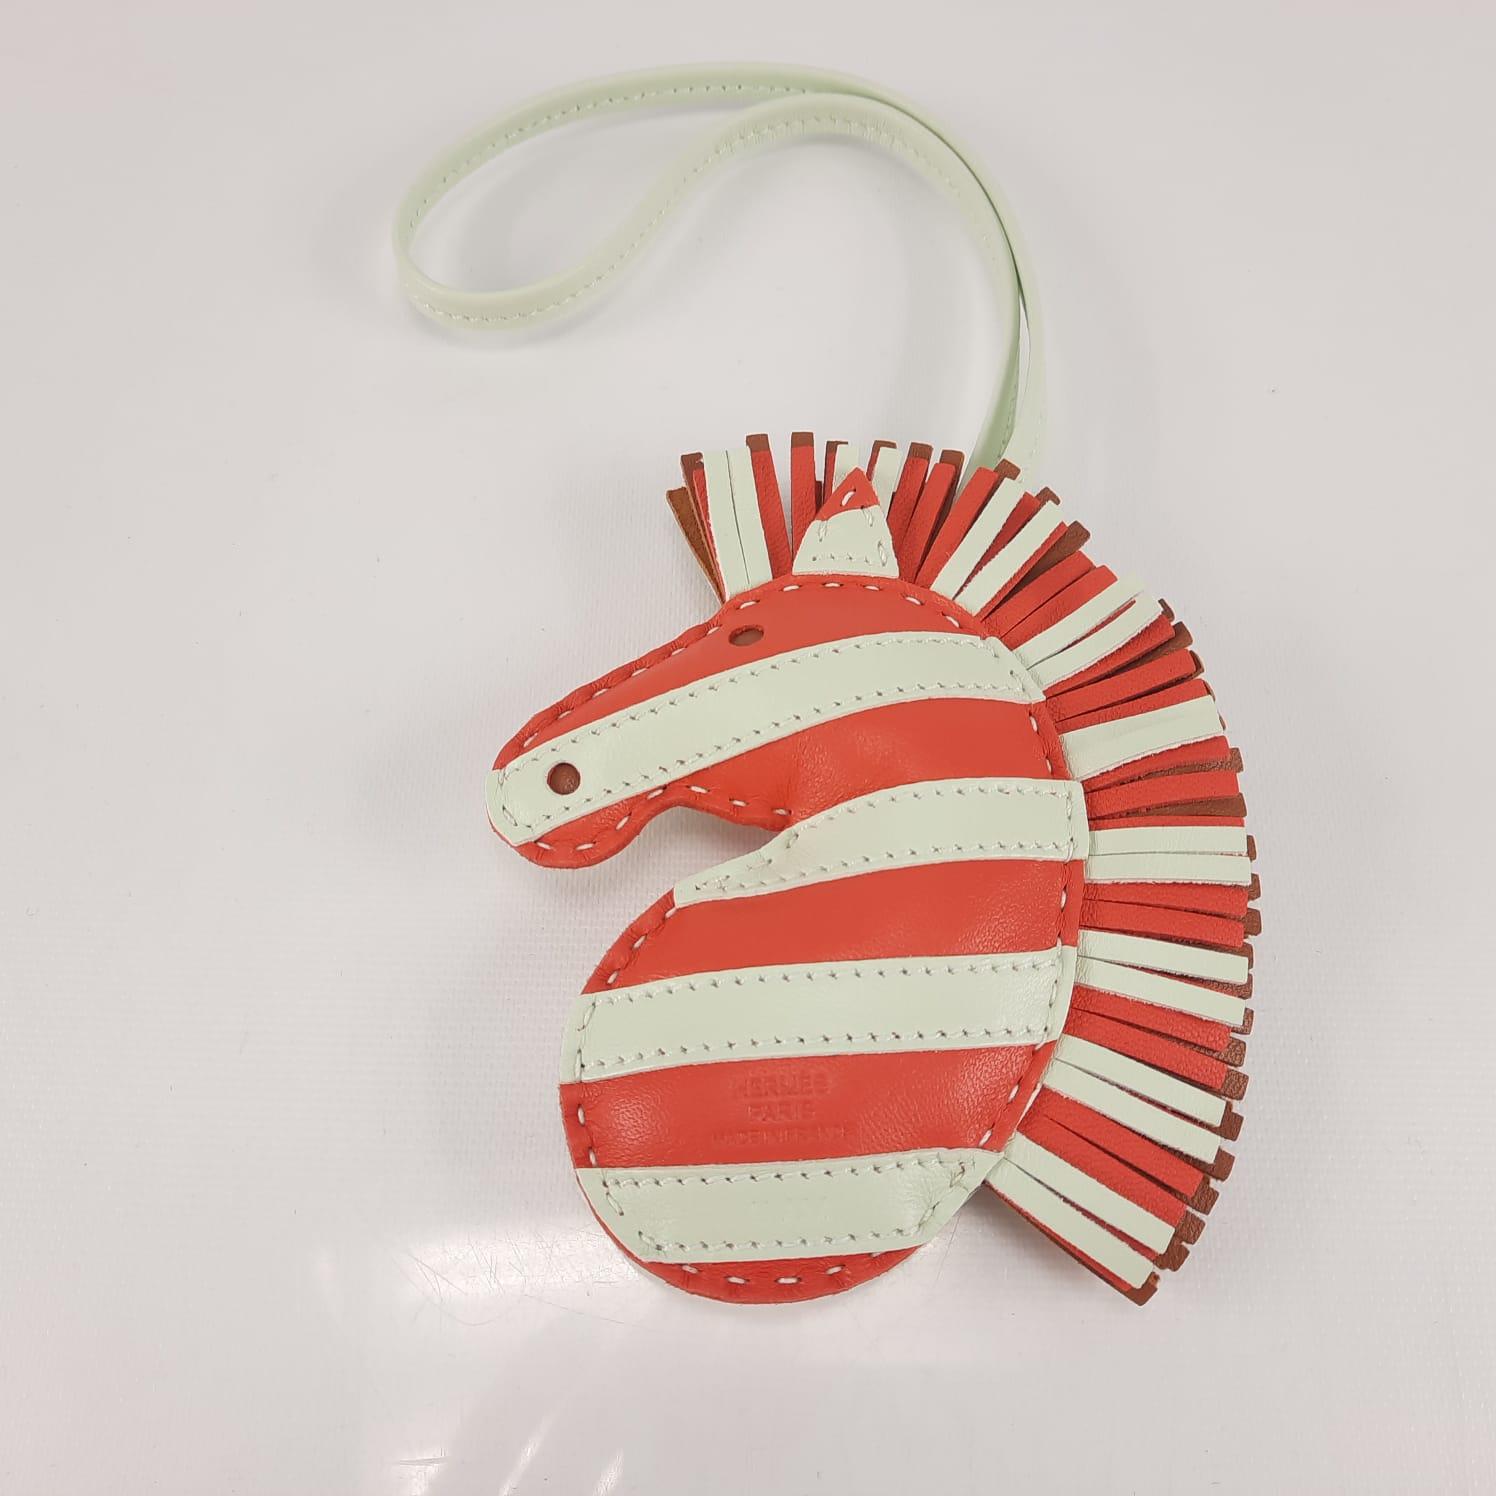 Zebra charm in Milo lambskin. With its colorful mane and jungle spirit, this zebra brings a whimsical touch to our bags. Dimensions: L 10.5 x H 10.3 cm